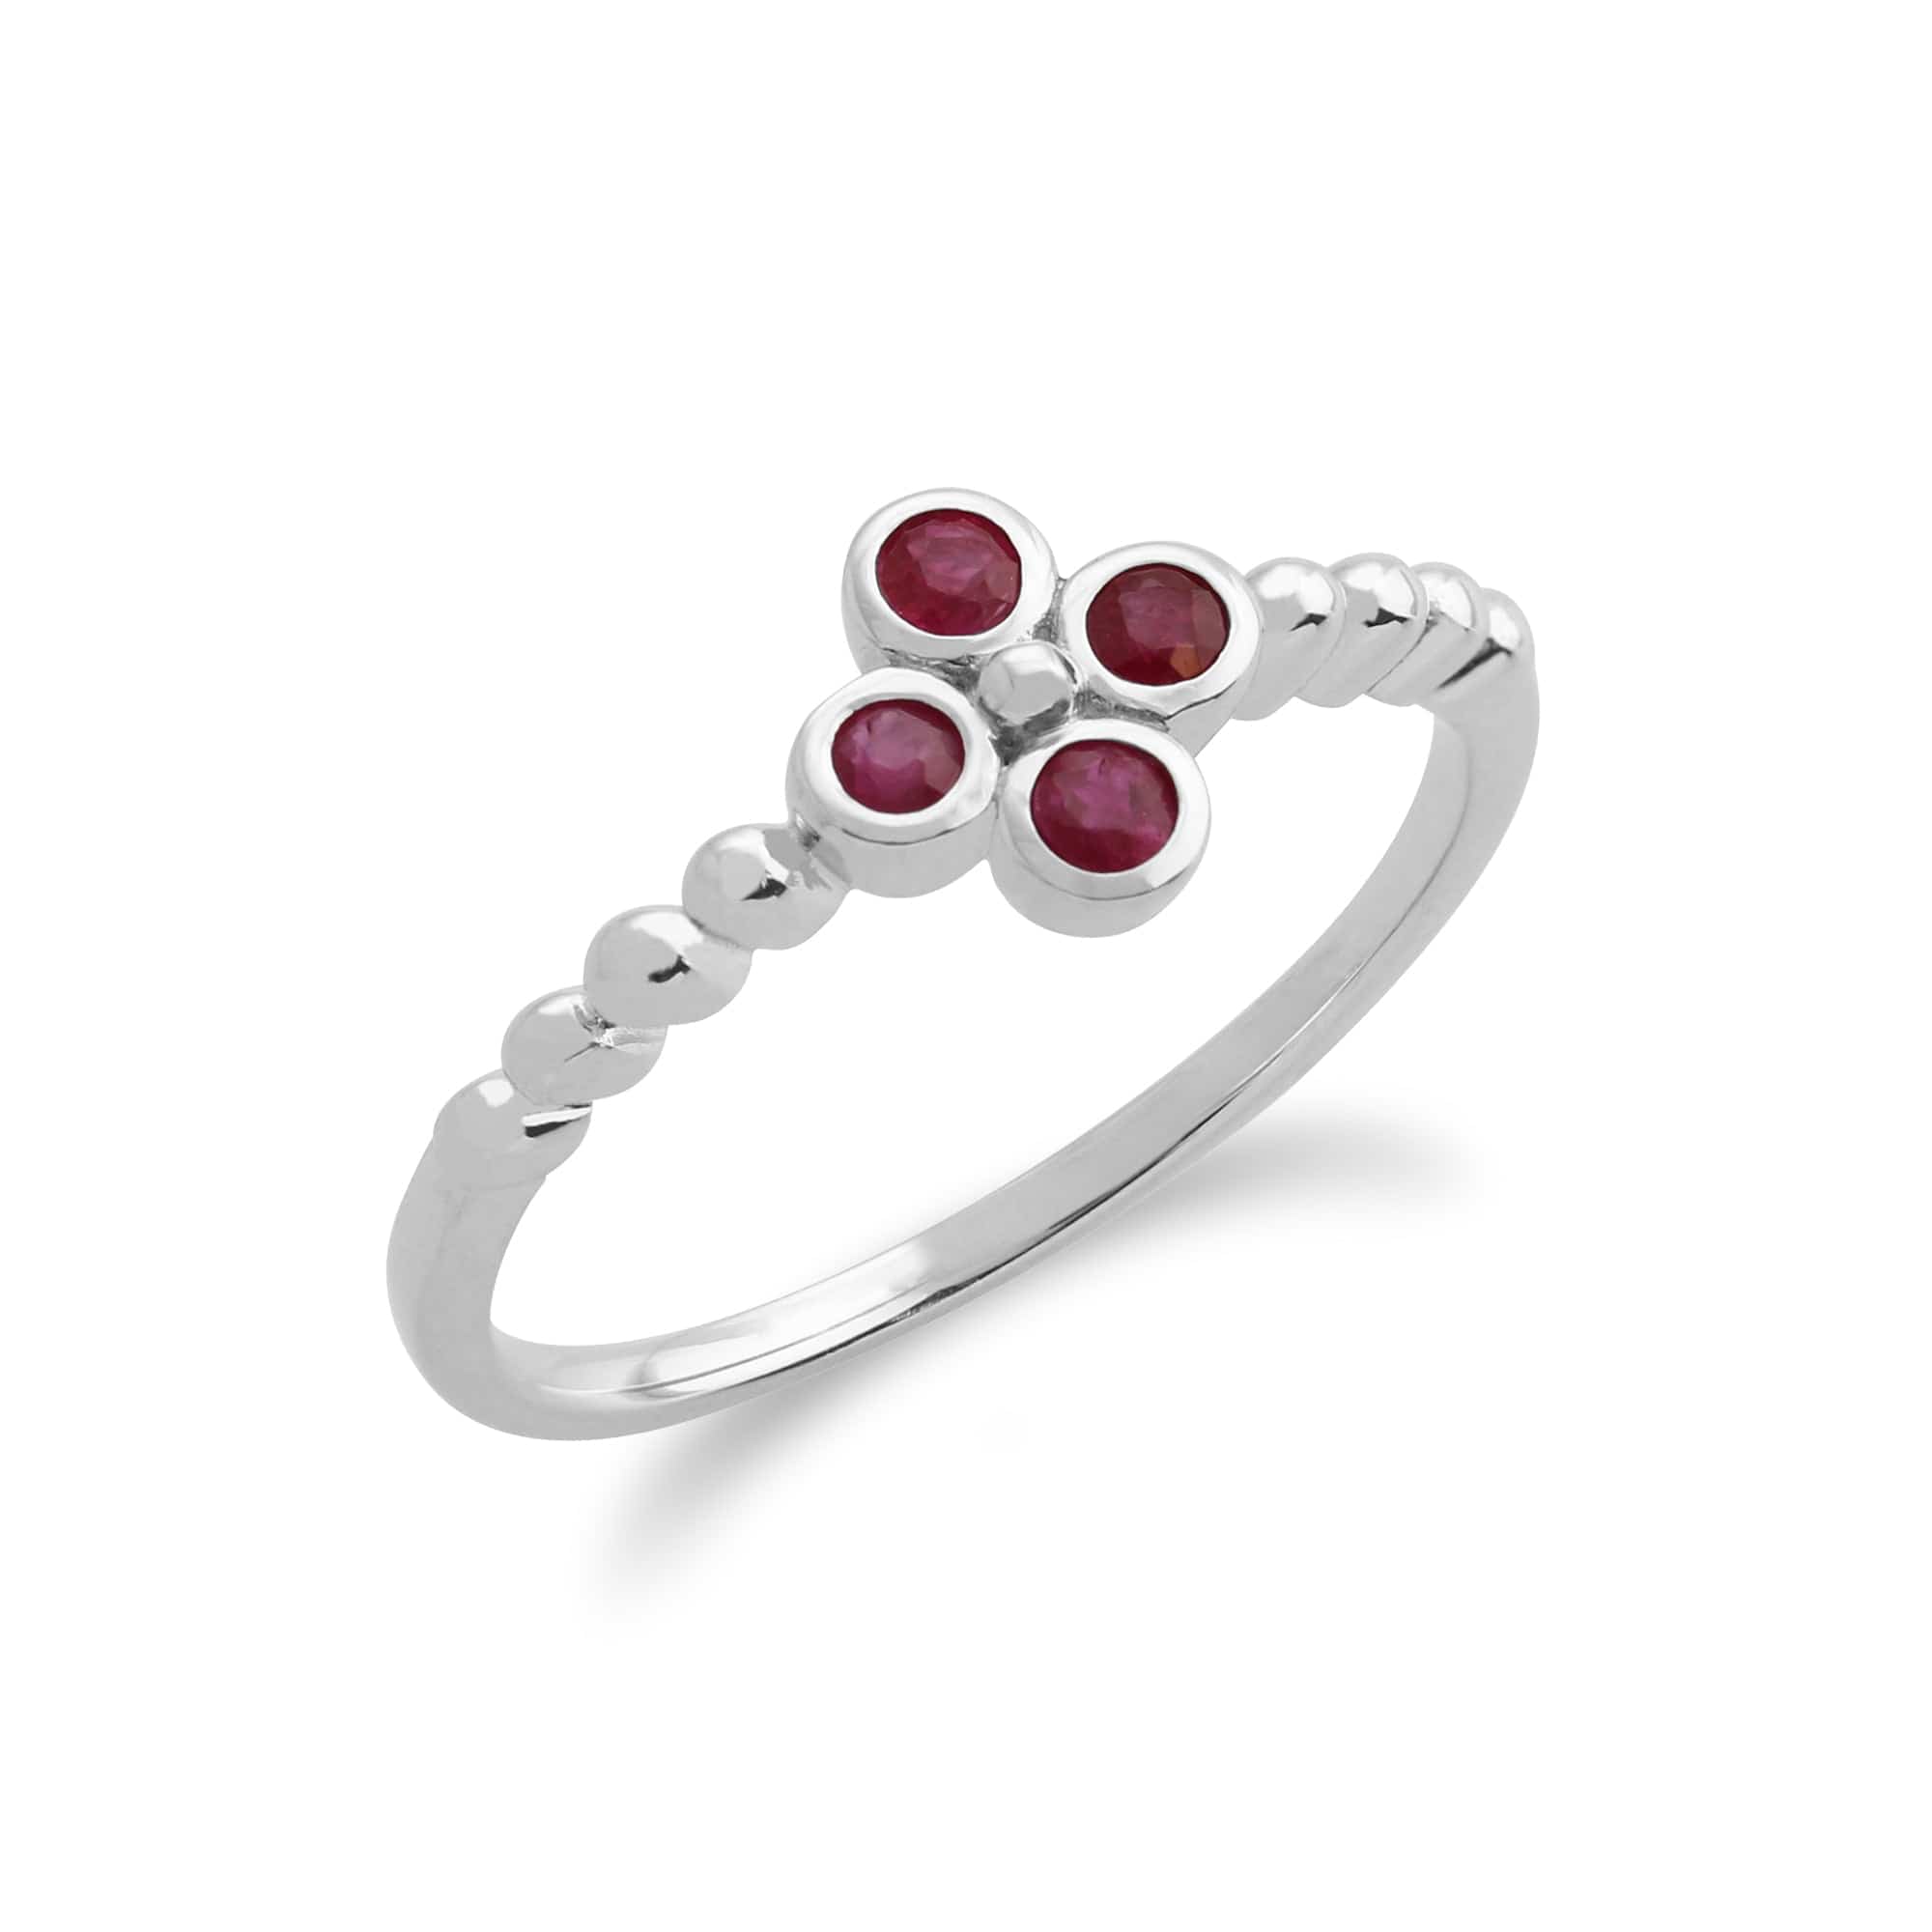 Gemondo Sterling Silver  0.25ct Ruby Cluster Ring Image 1